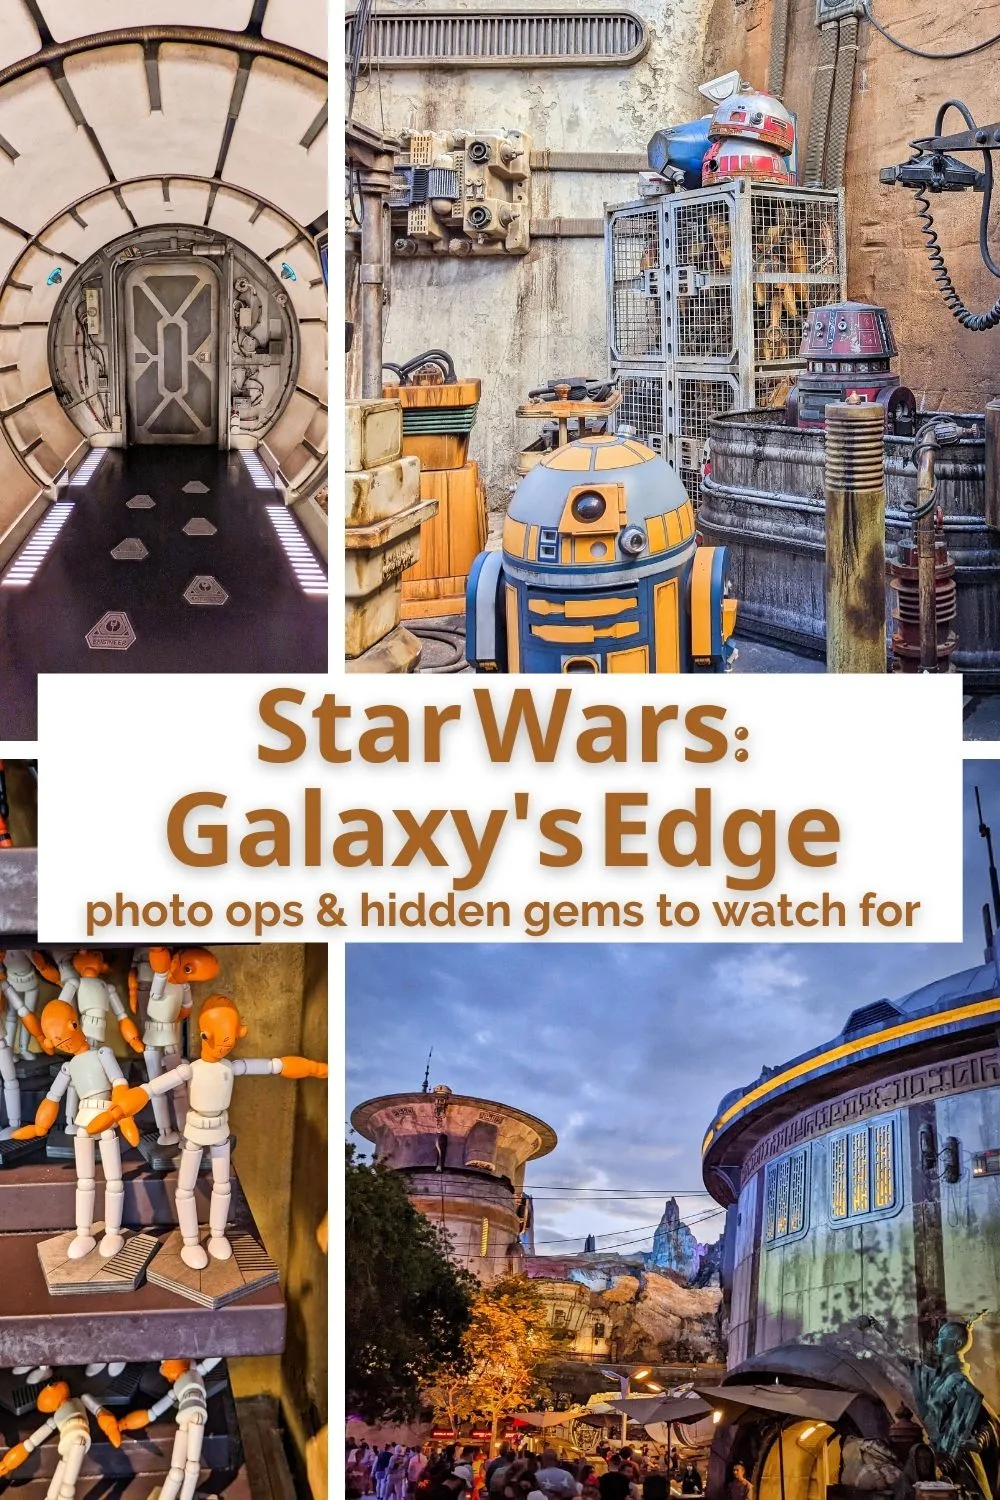 There are many hidden gems in Star Wars: Galaxy's Edge that big fans will notice. From interesting art to obscure Star Wars references these are our favorite finds in Star Wars land at Disney World. (And a scavenger hunt too!)